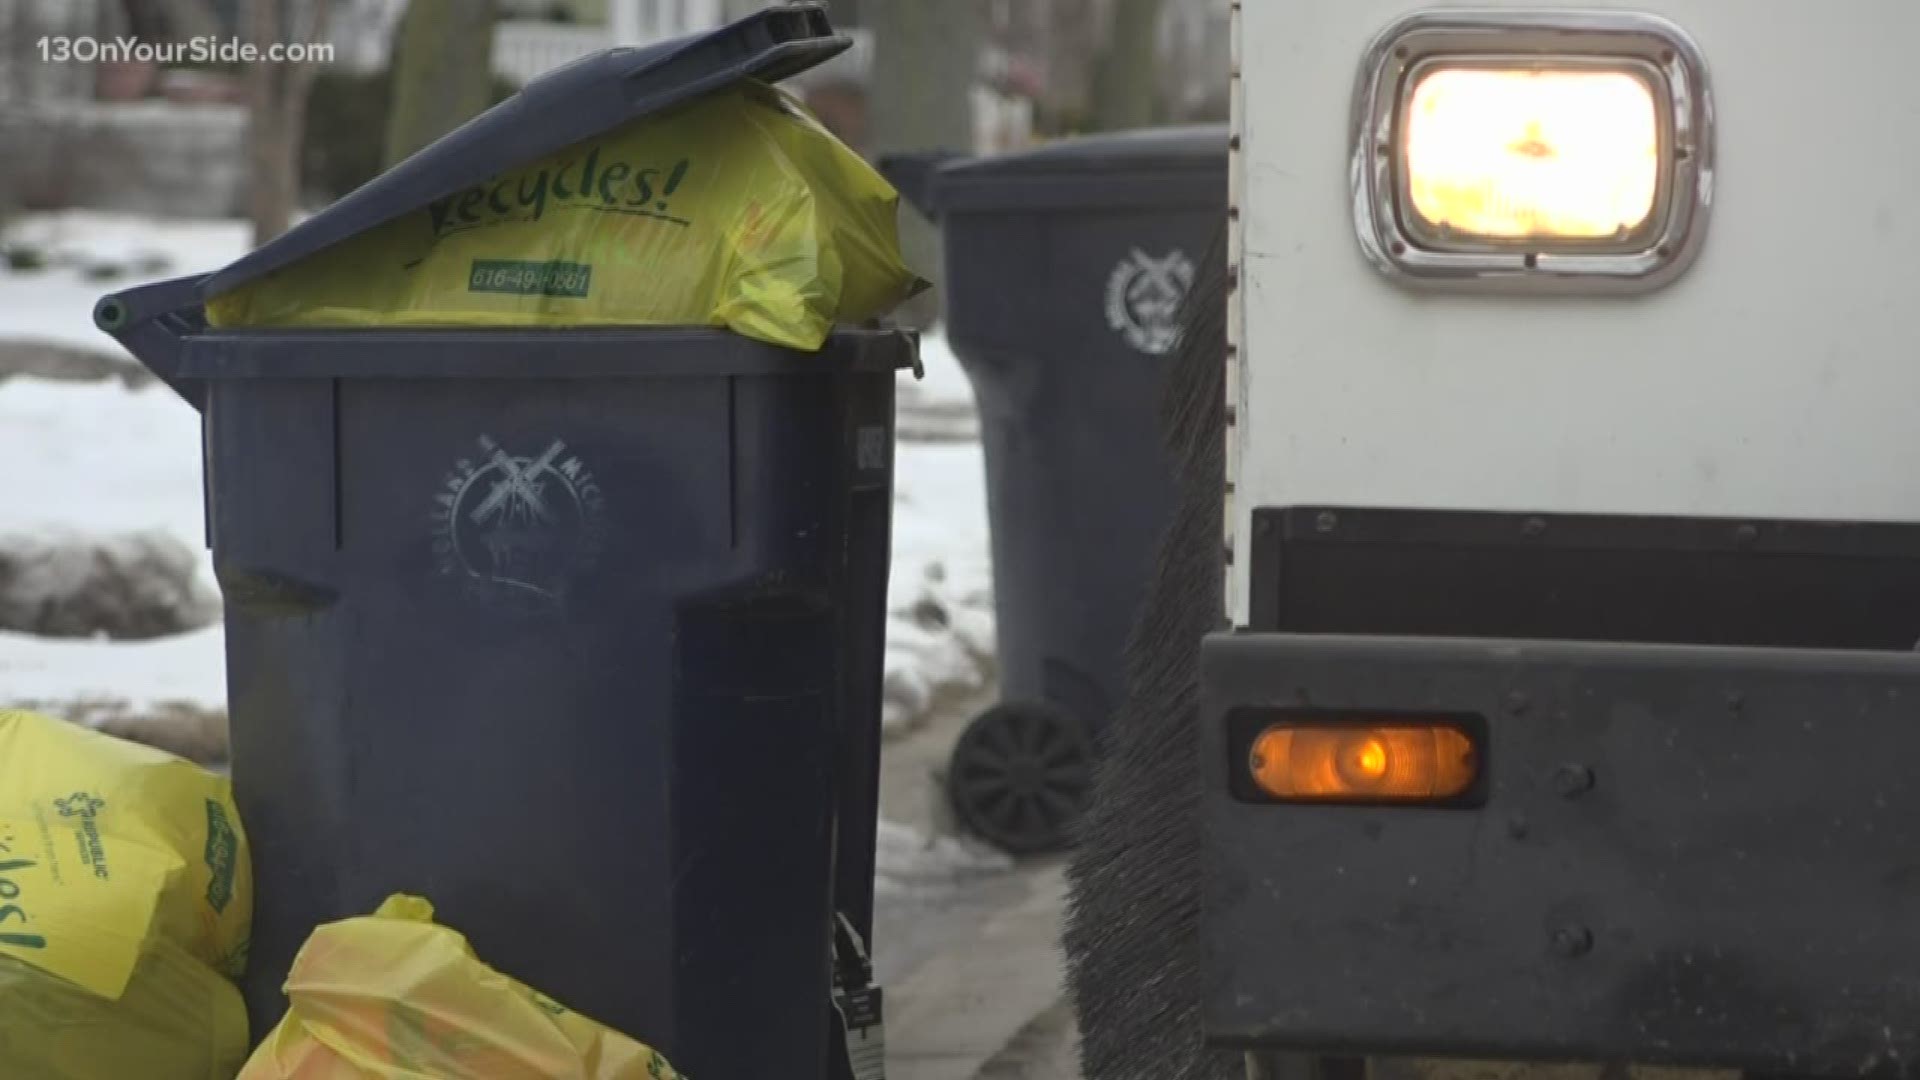 City leaders are pushing for recyclables to be collected in a separate cart.